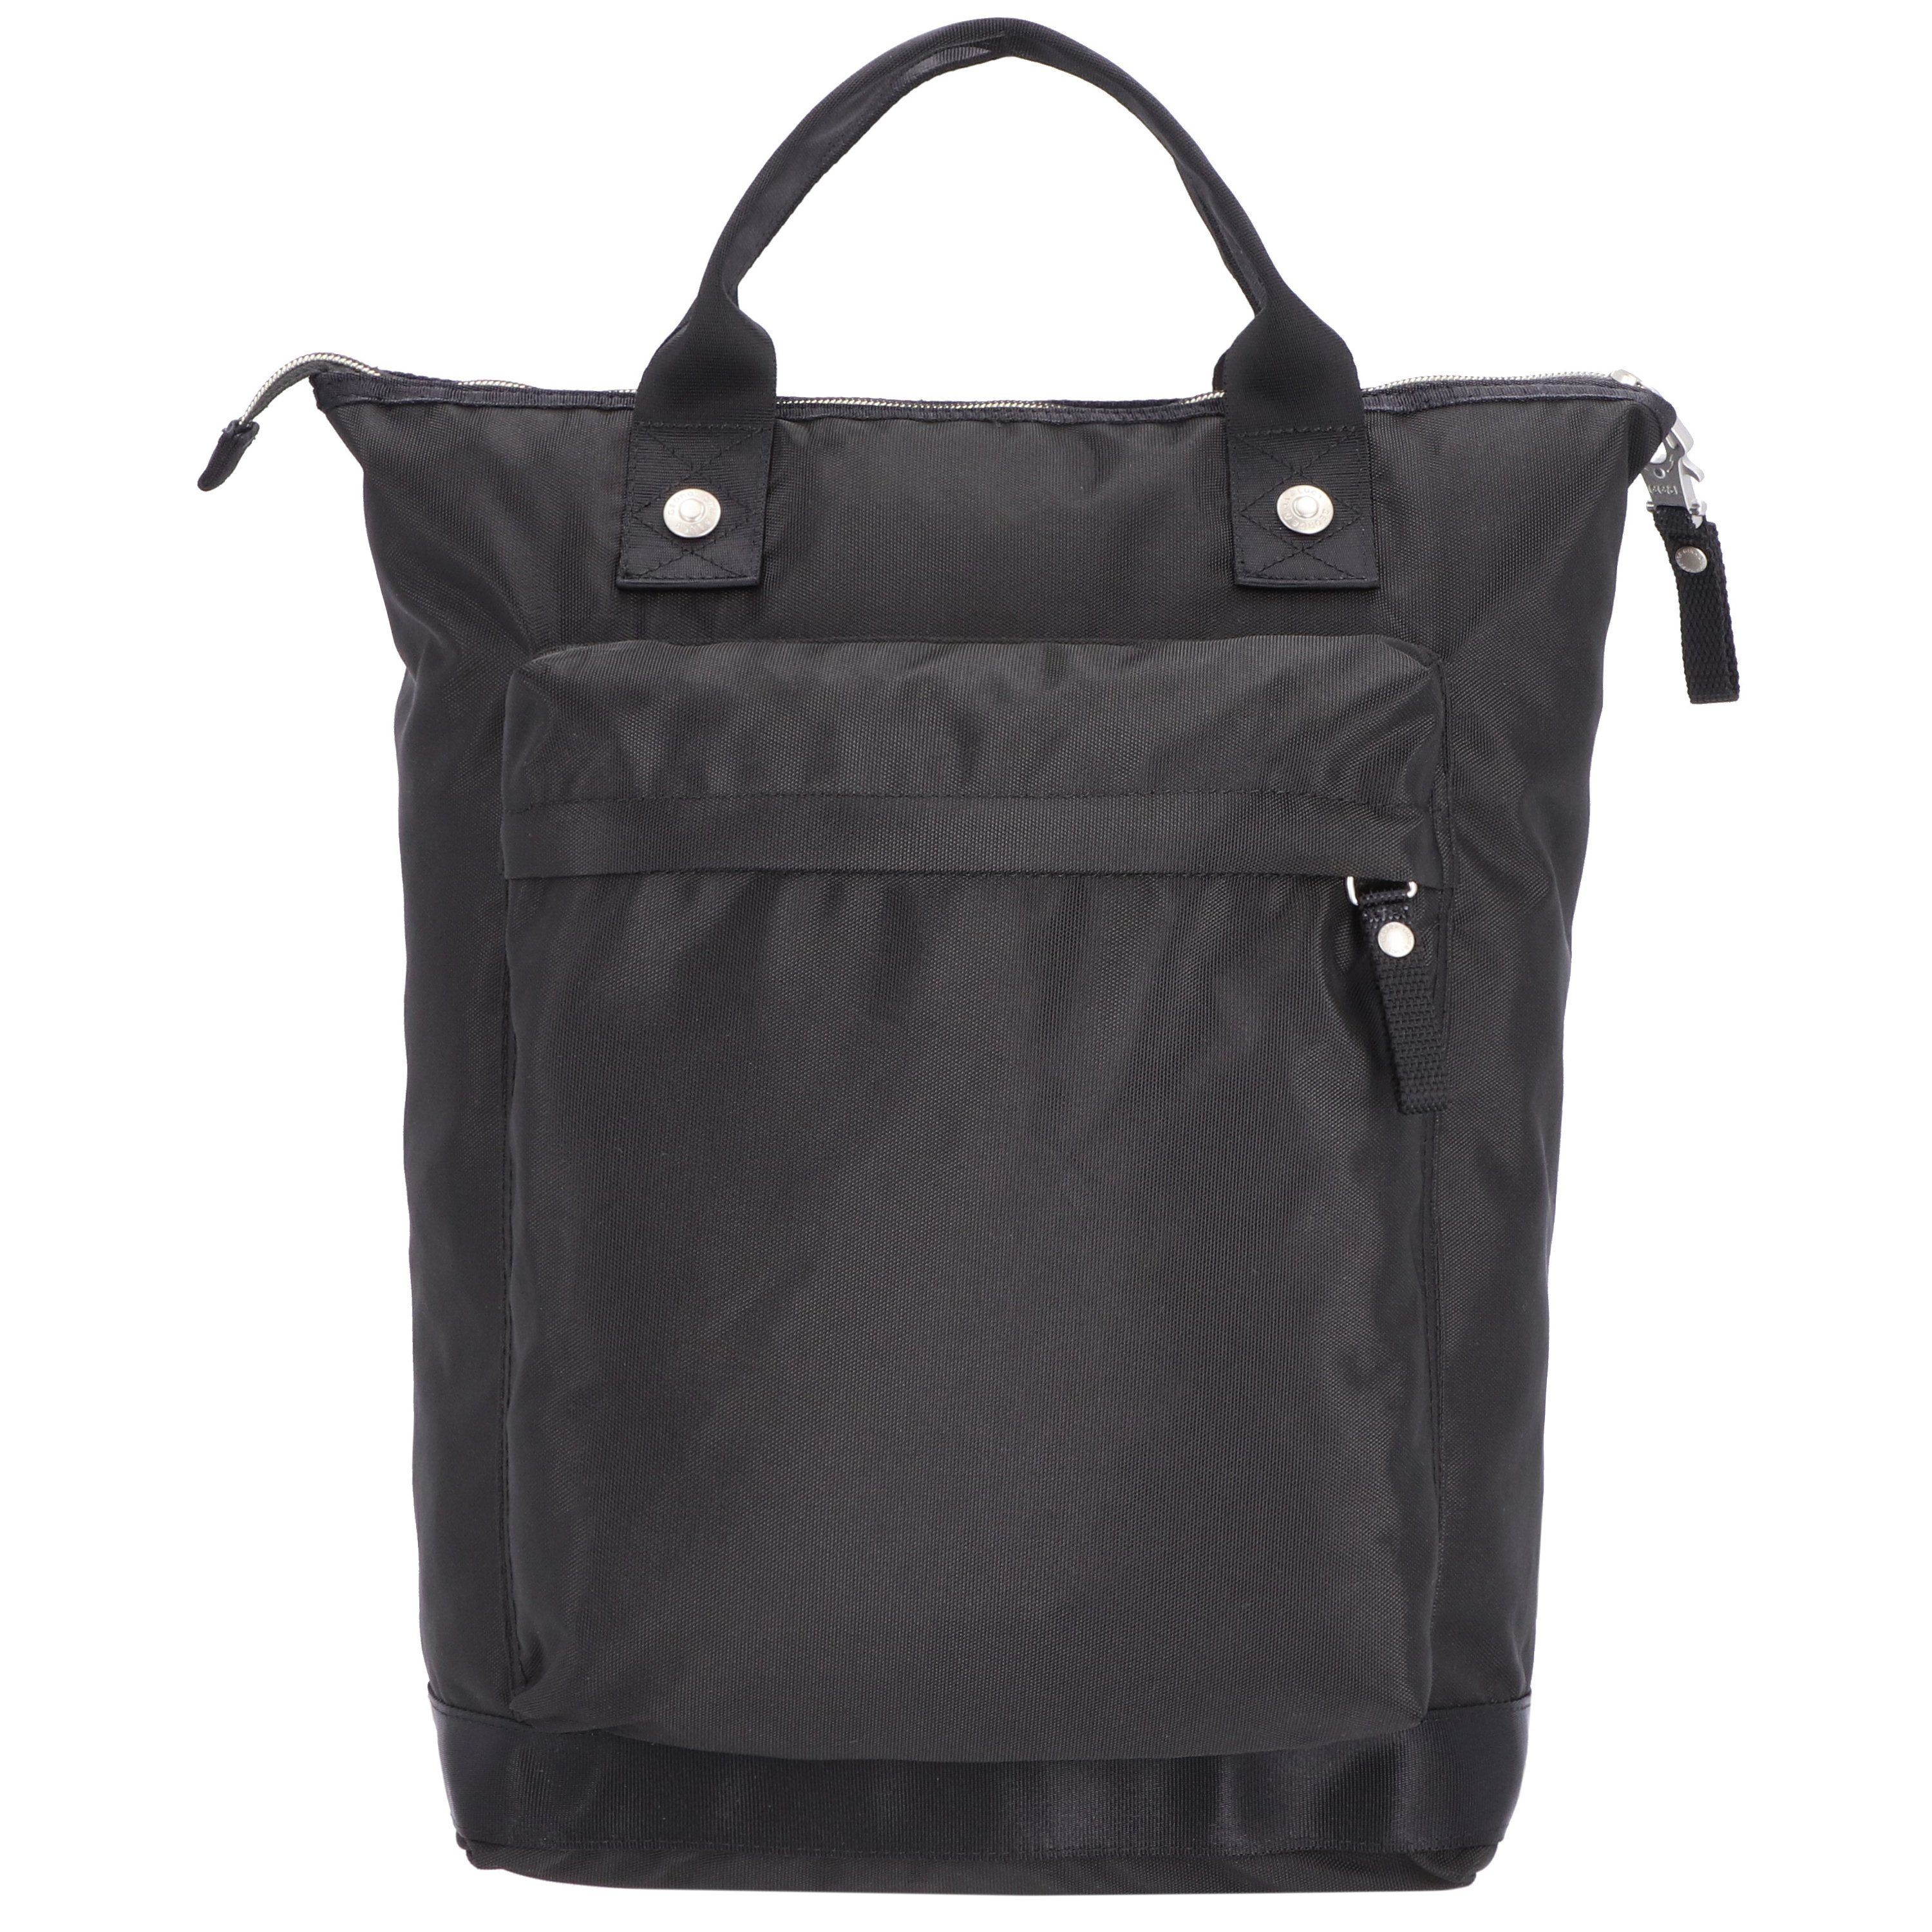 George Gina & Lucy Laptoprucksack The Modernist, Polyester